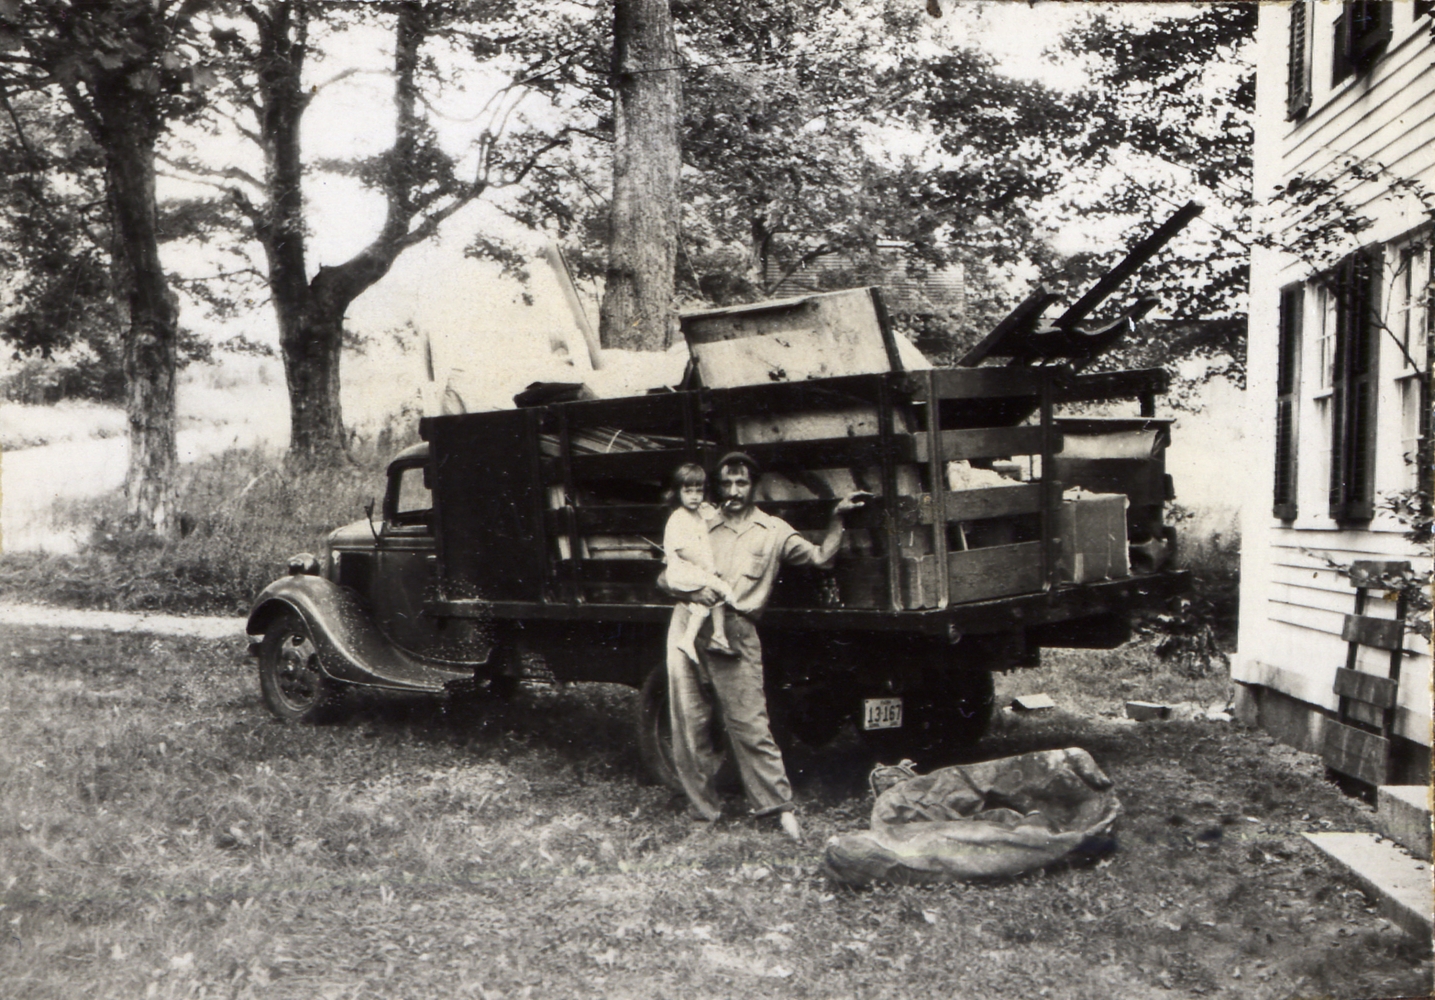 Gorky and Maro moving from Roxbury to Sherman, CT, September 1945. Photograph by Agnes Magruder Gorky.